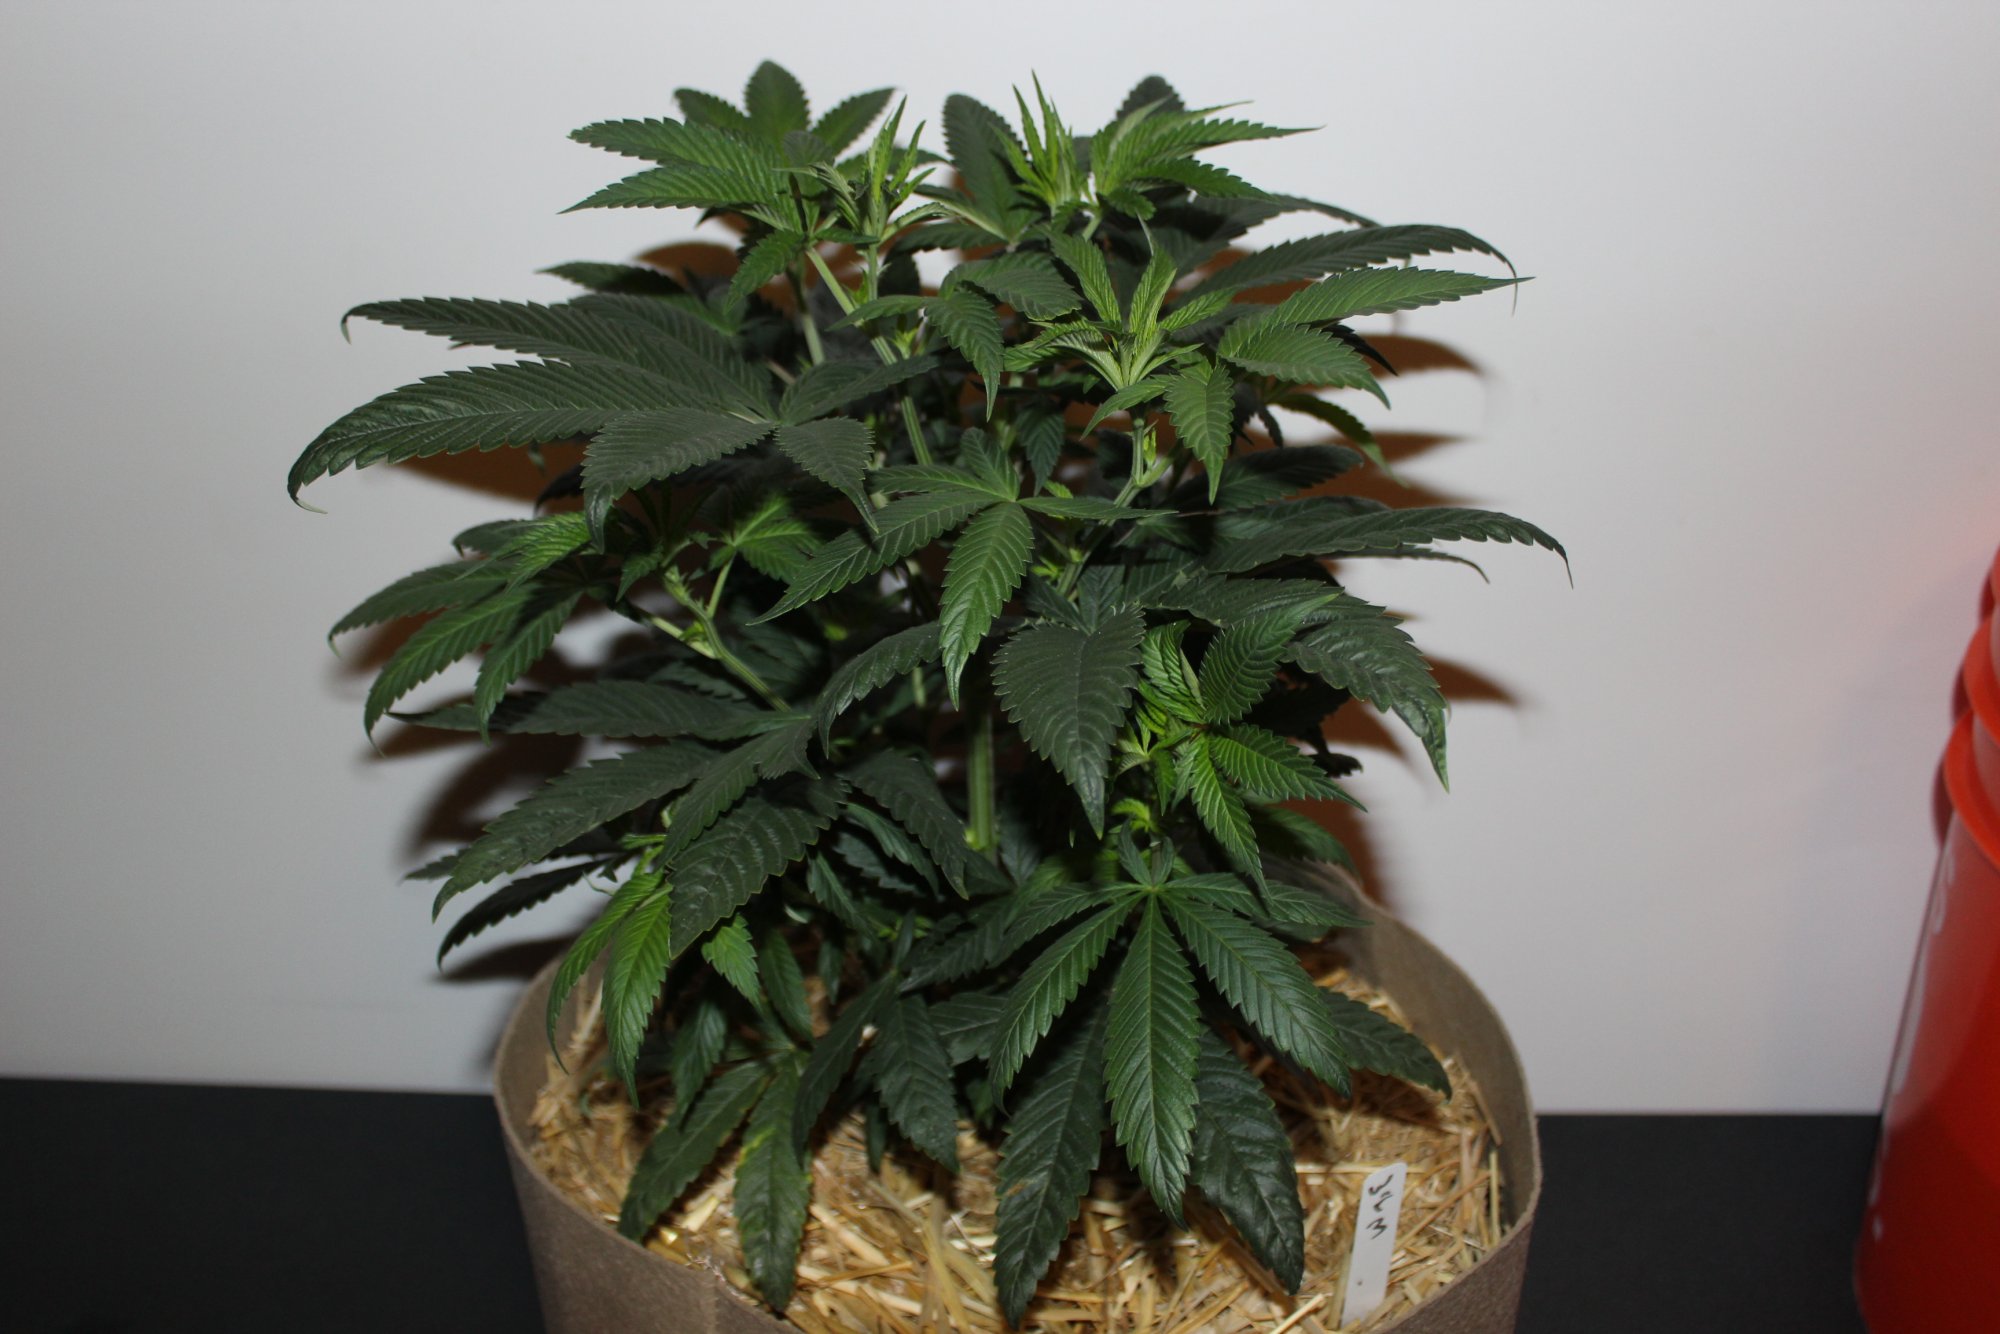 Time Bandit 3 flower day 2 1